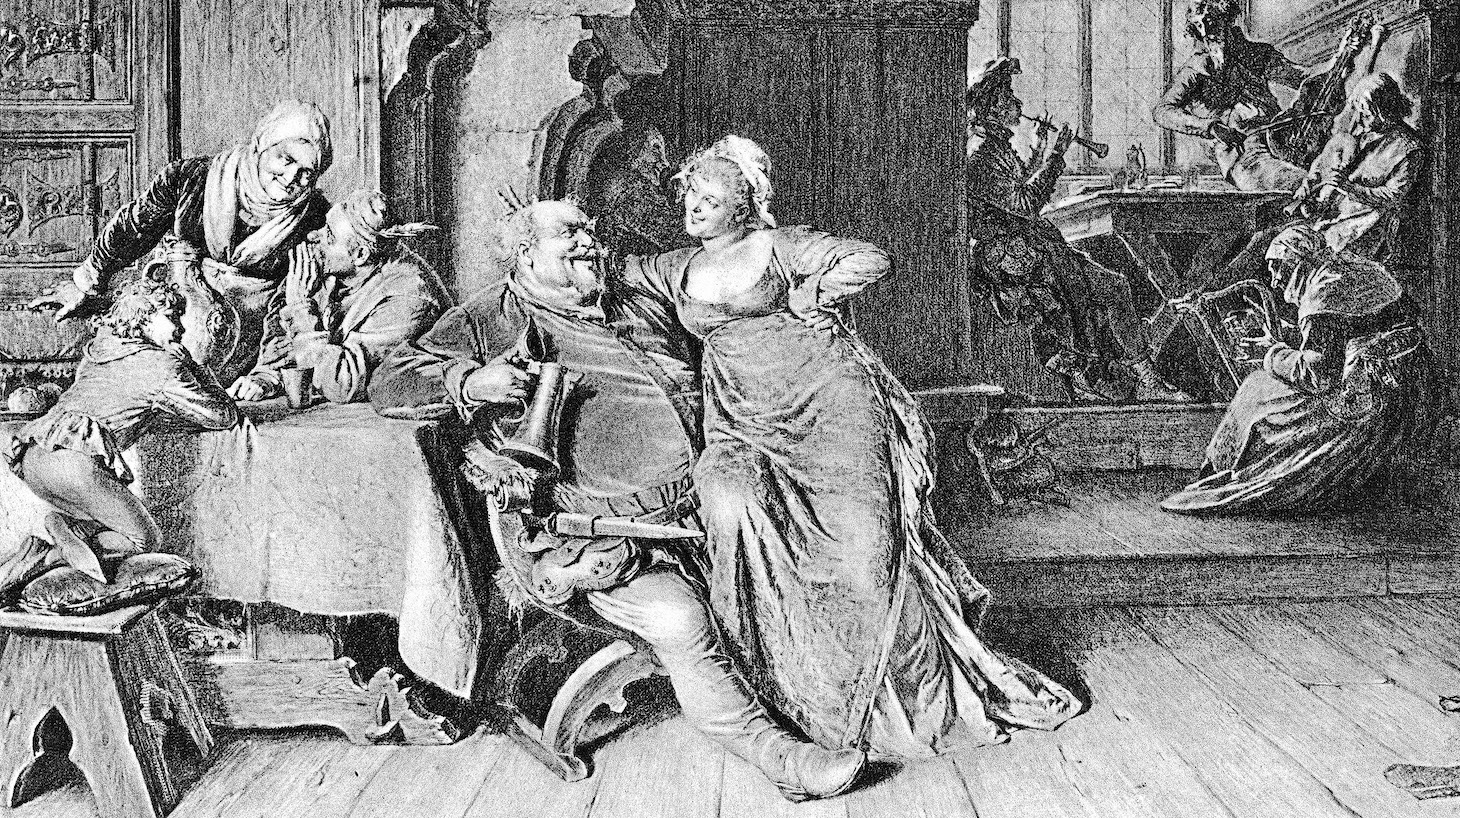 Falstaff sits with a woman, holding a tankard, in an illustrated scene from the Shakespeare play, 'King Henry IV,' Act II, Scene IV. (Kean Collection/Getty Images)